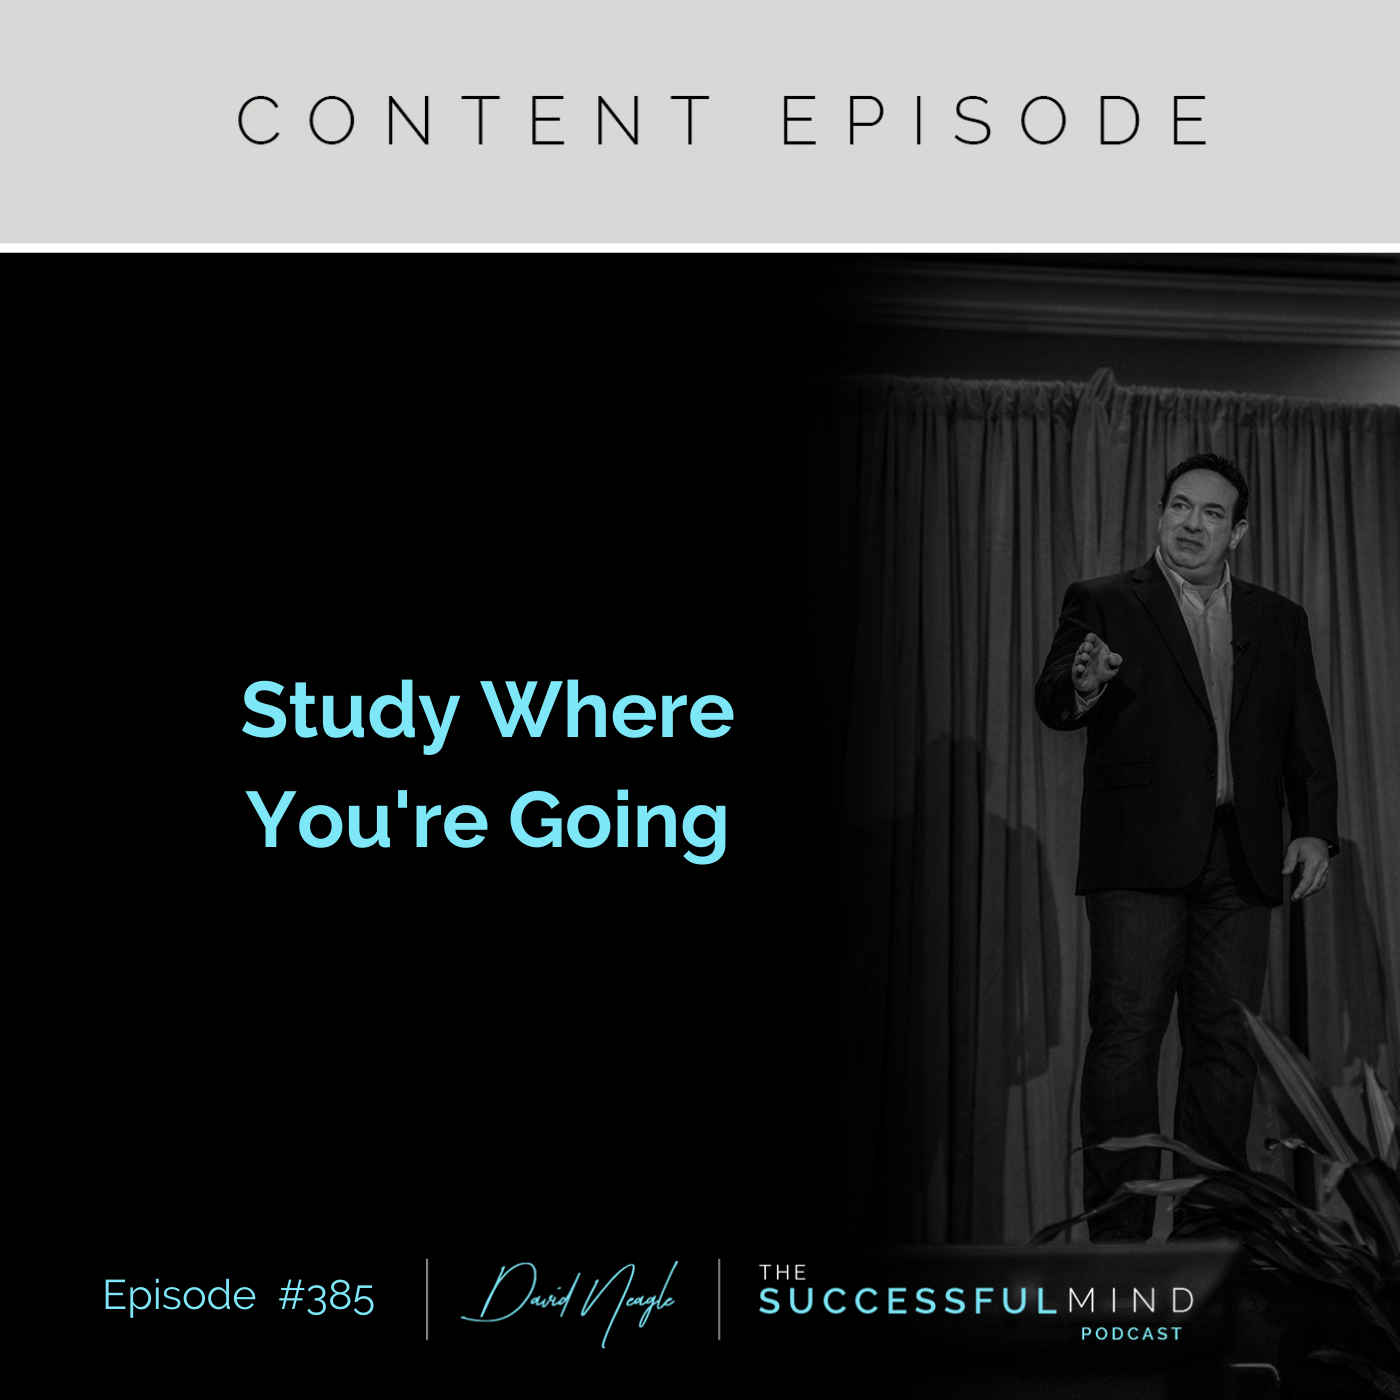 The Successful Mind Podcast - Episode 385 - Study Where You're Going